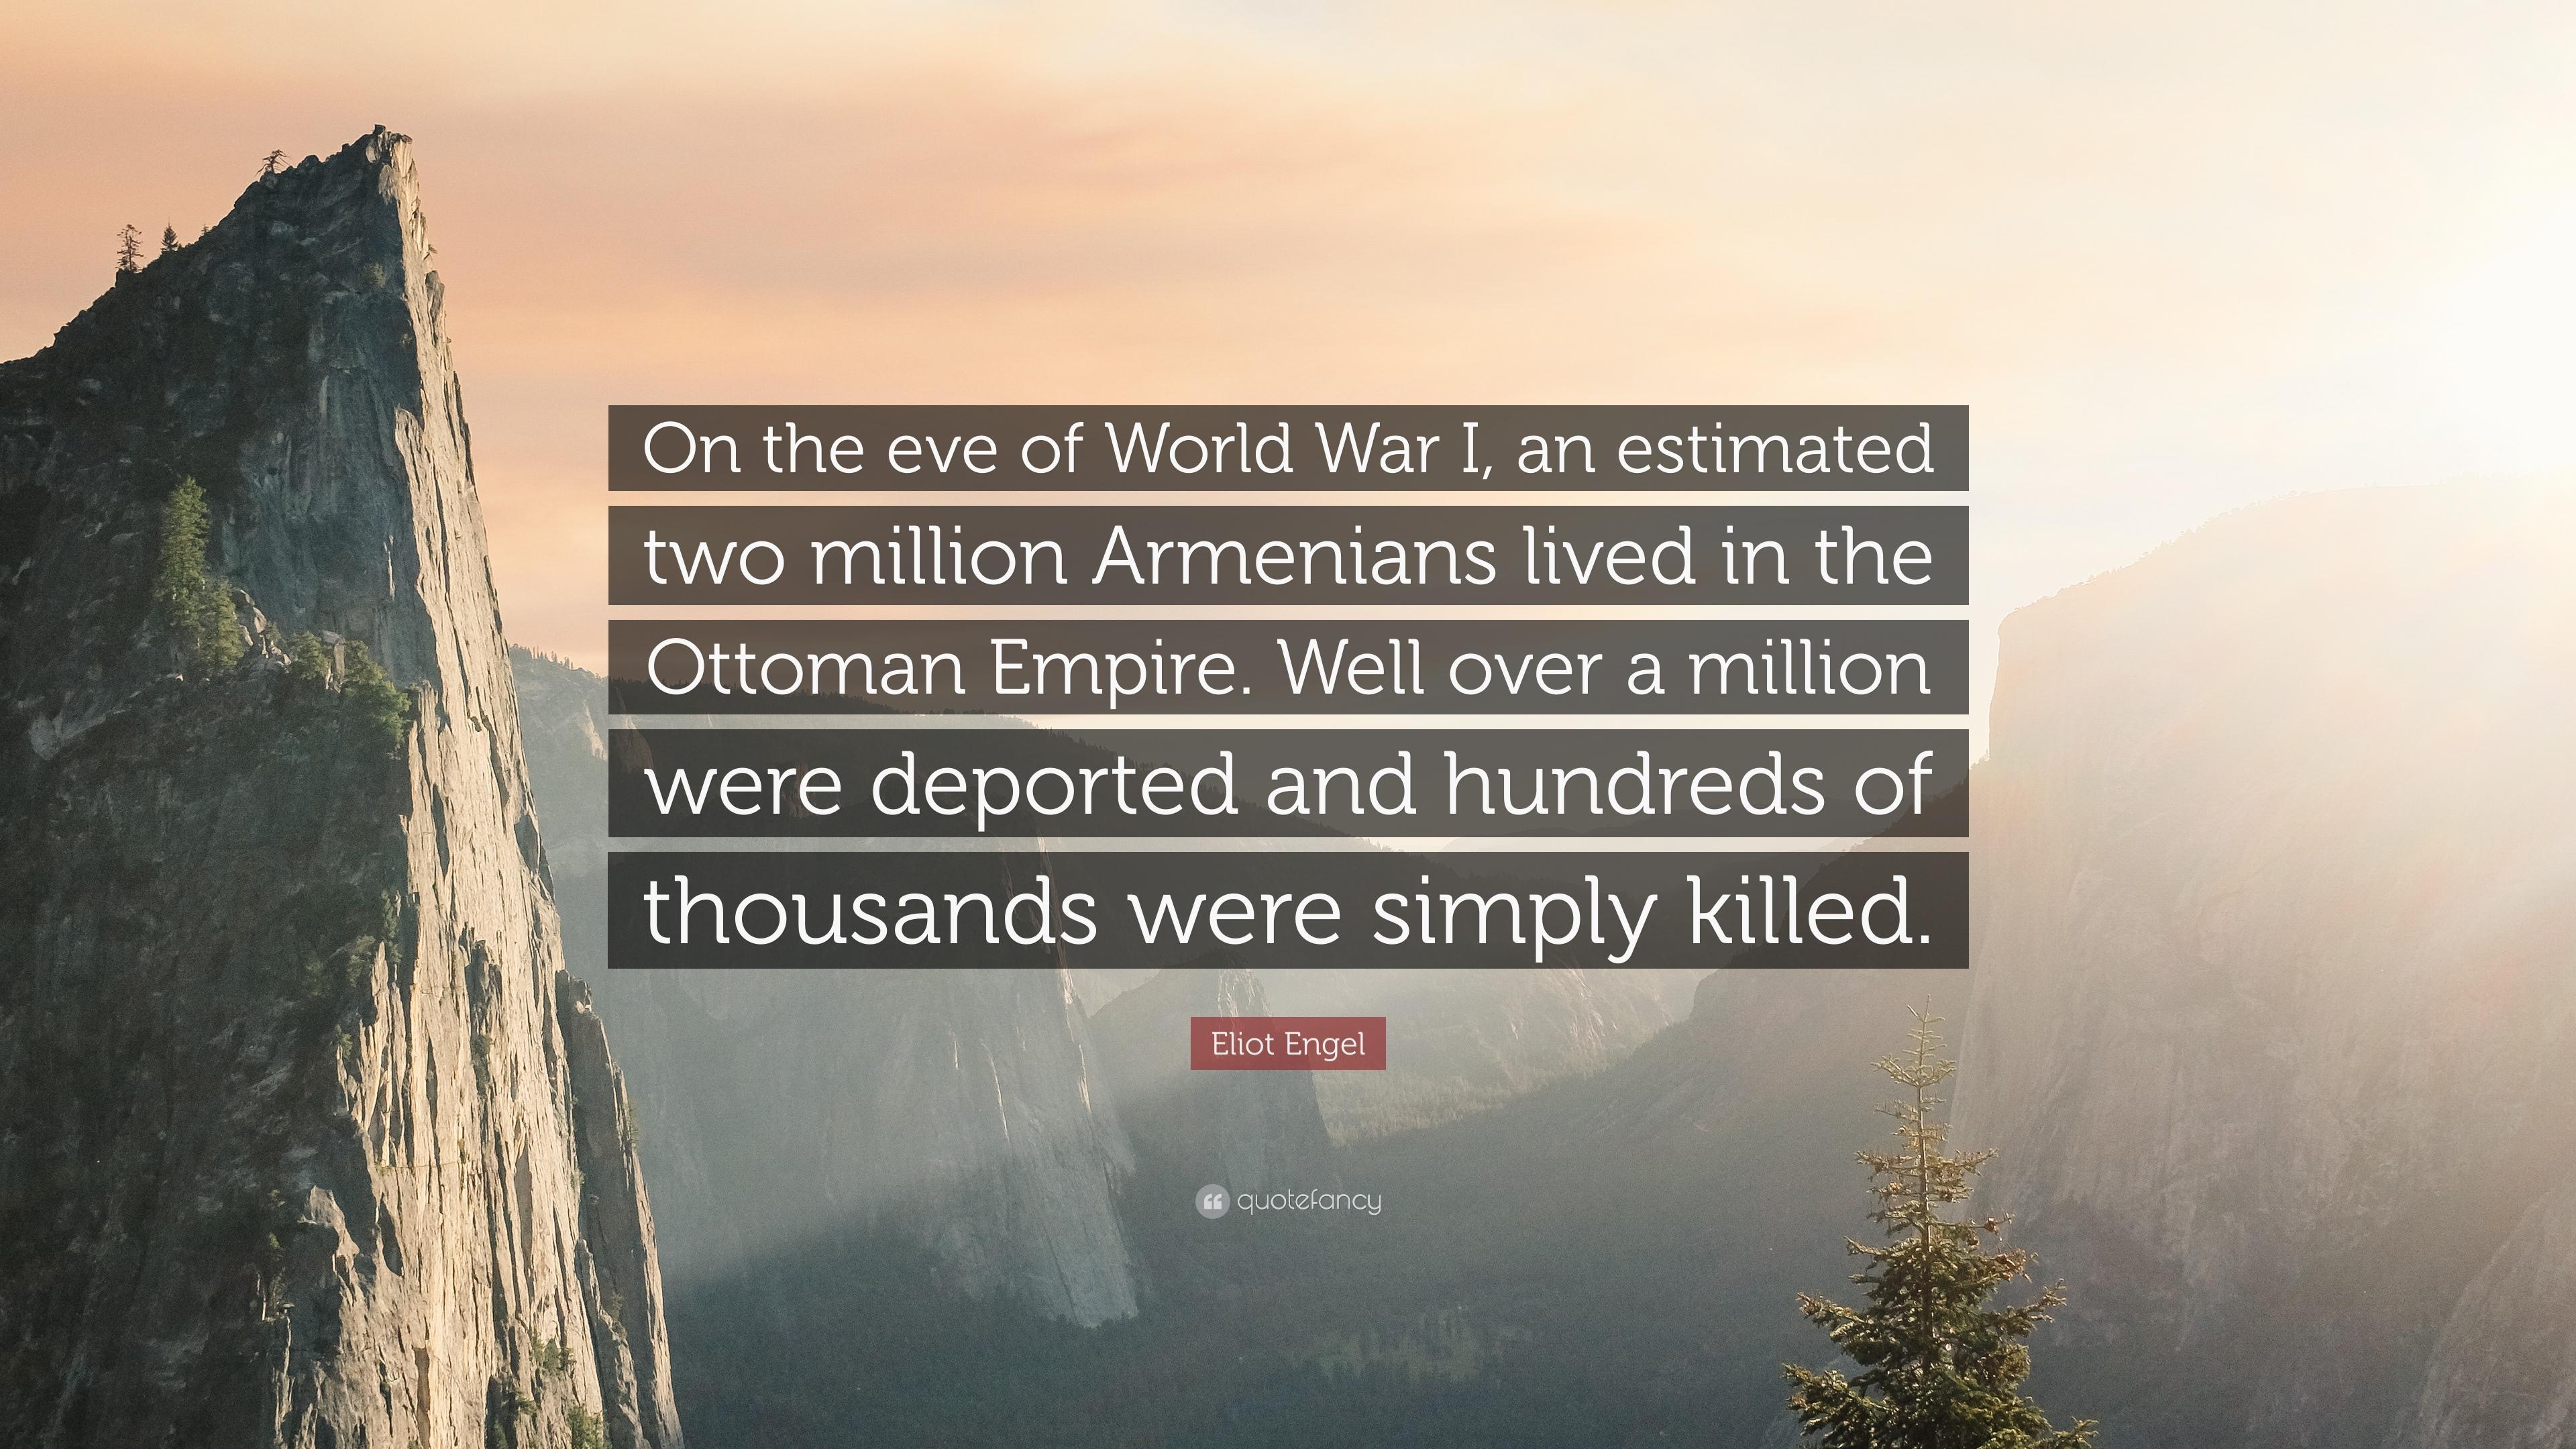 Eliot Engel Quote: “On the eve of World War I, an estimated two